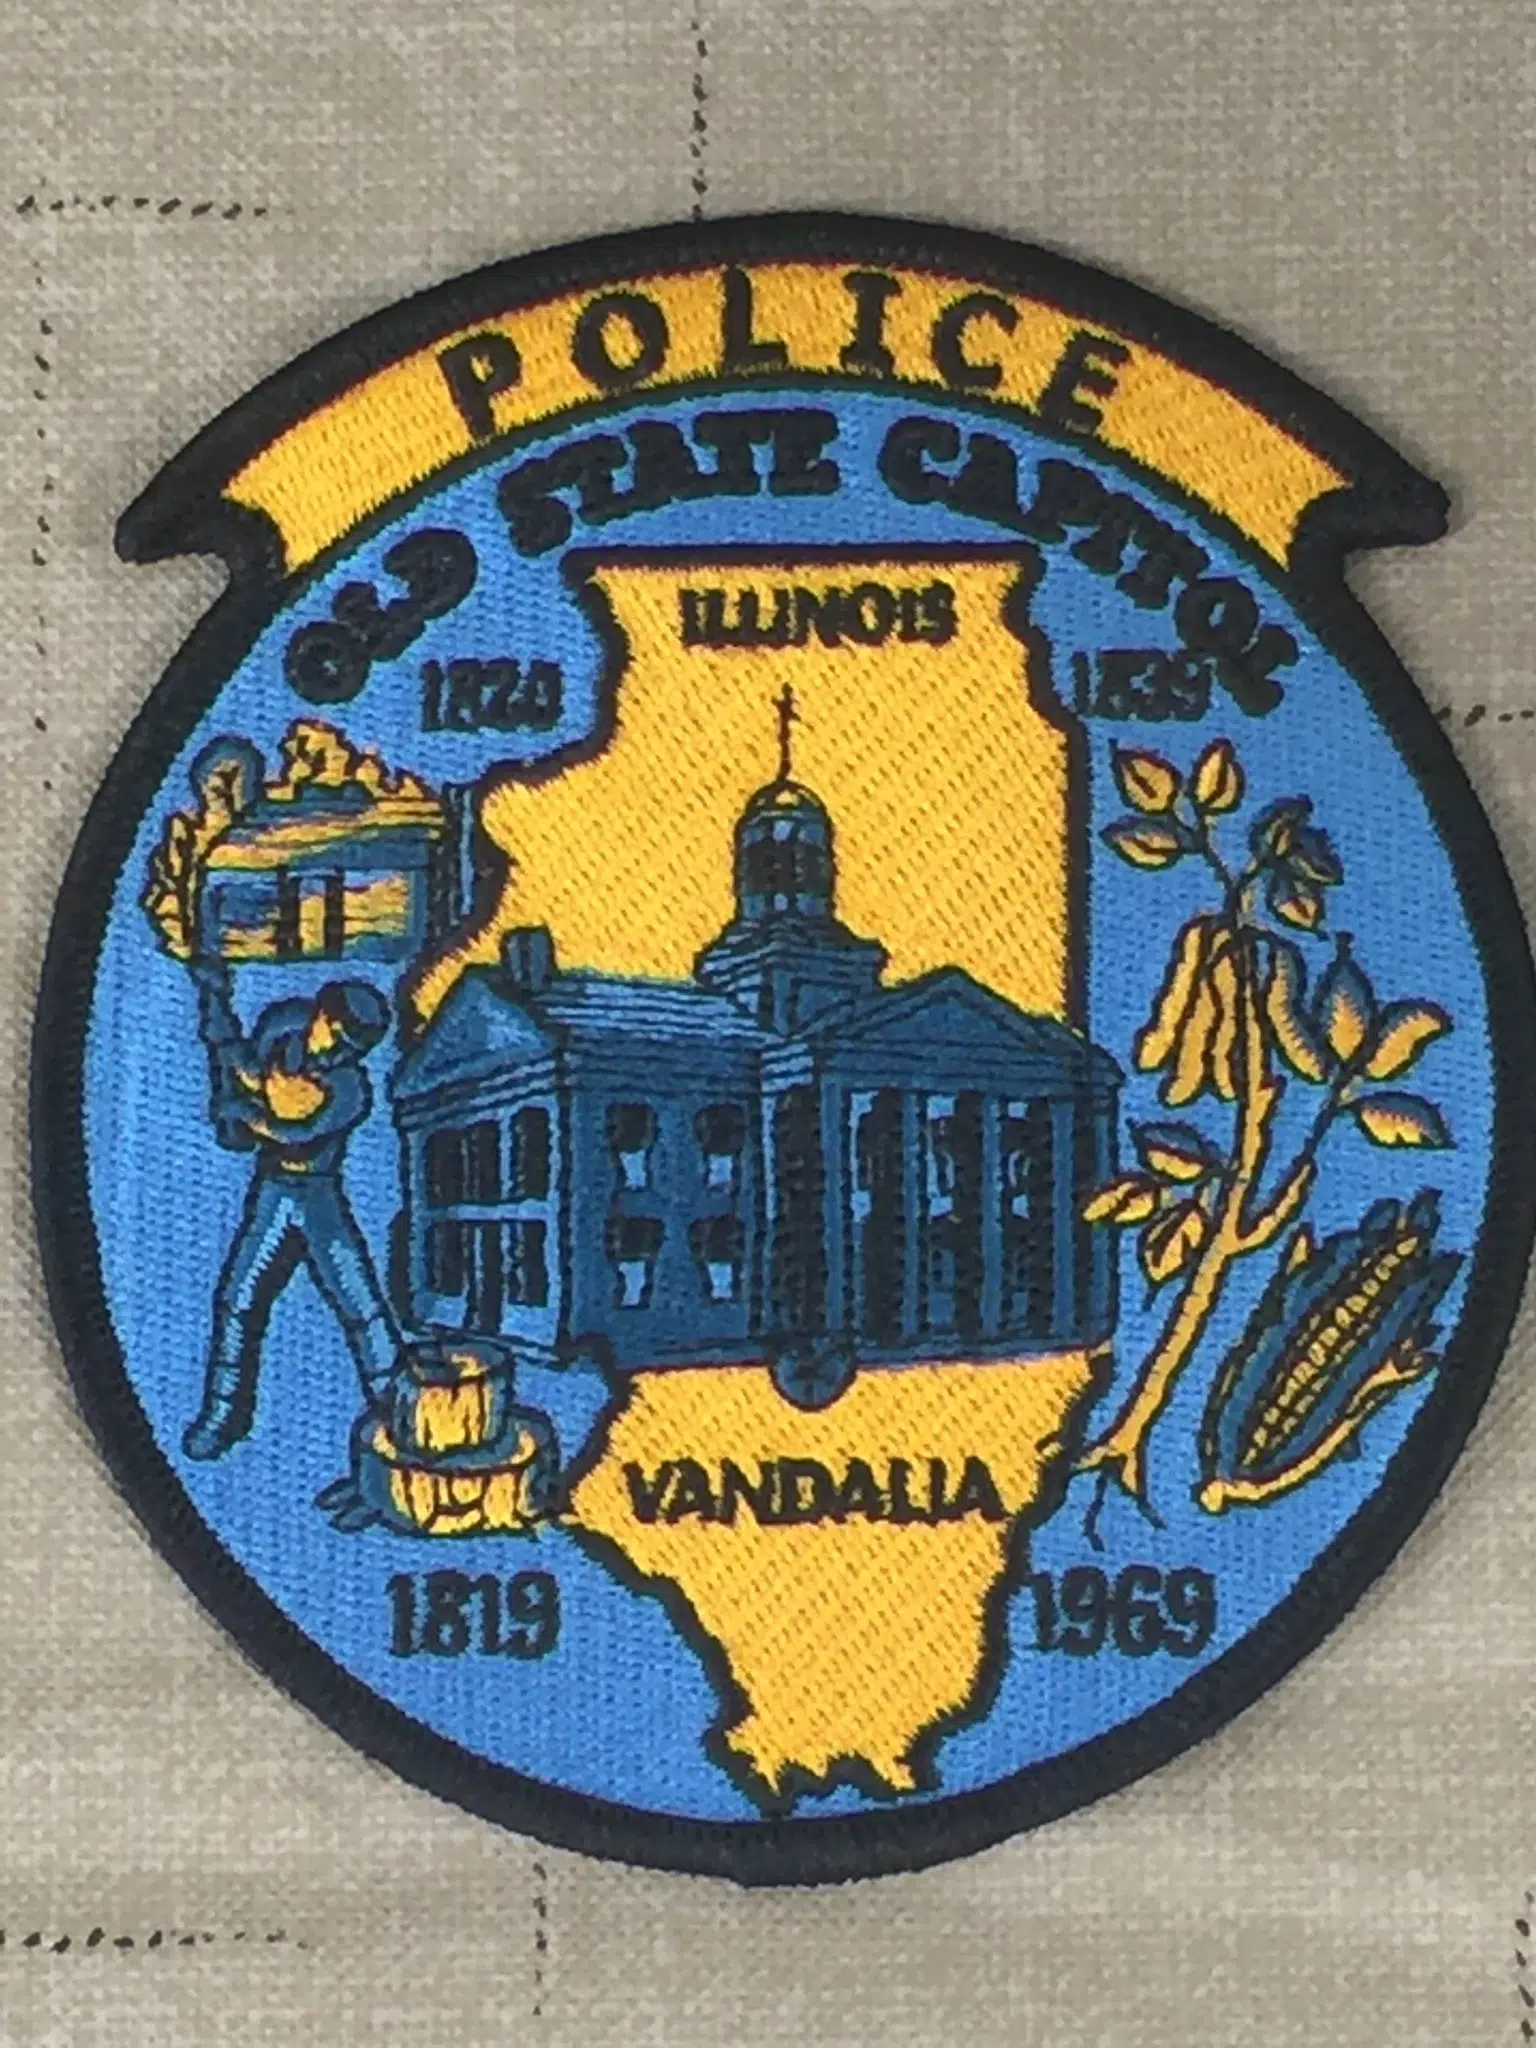 Vandalia PD arrest woman following alleged hit and run accident 